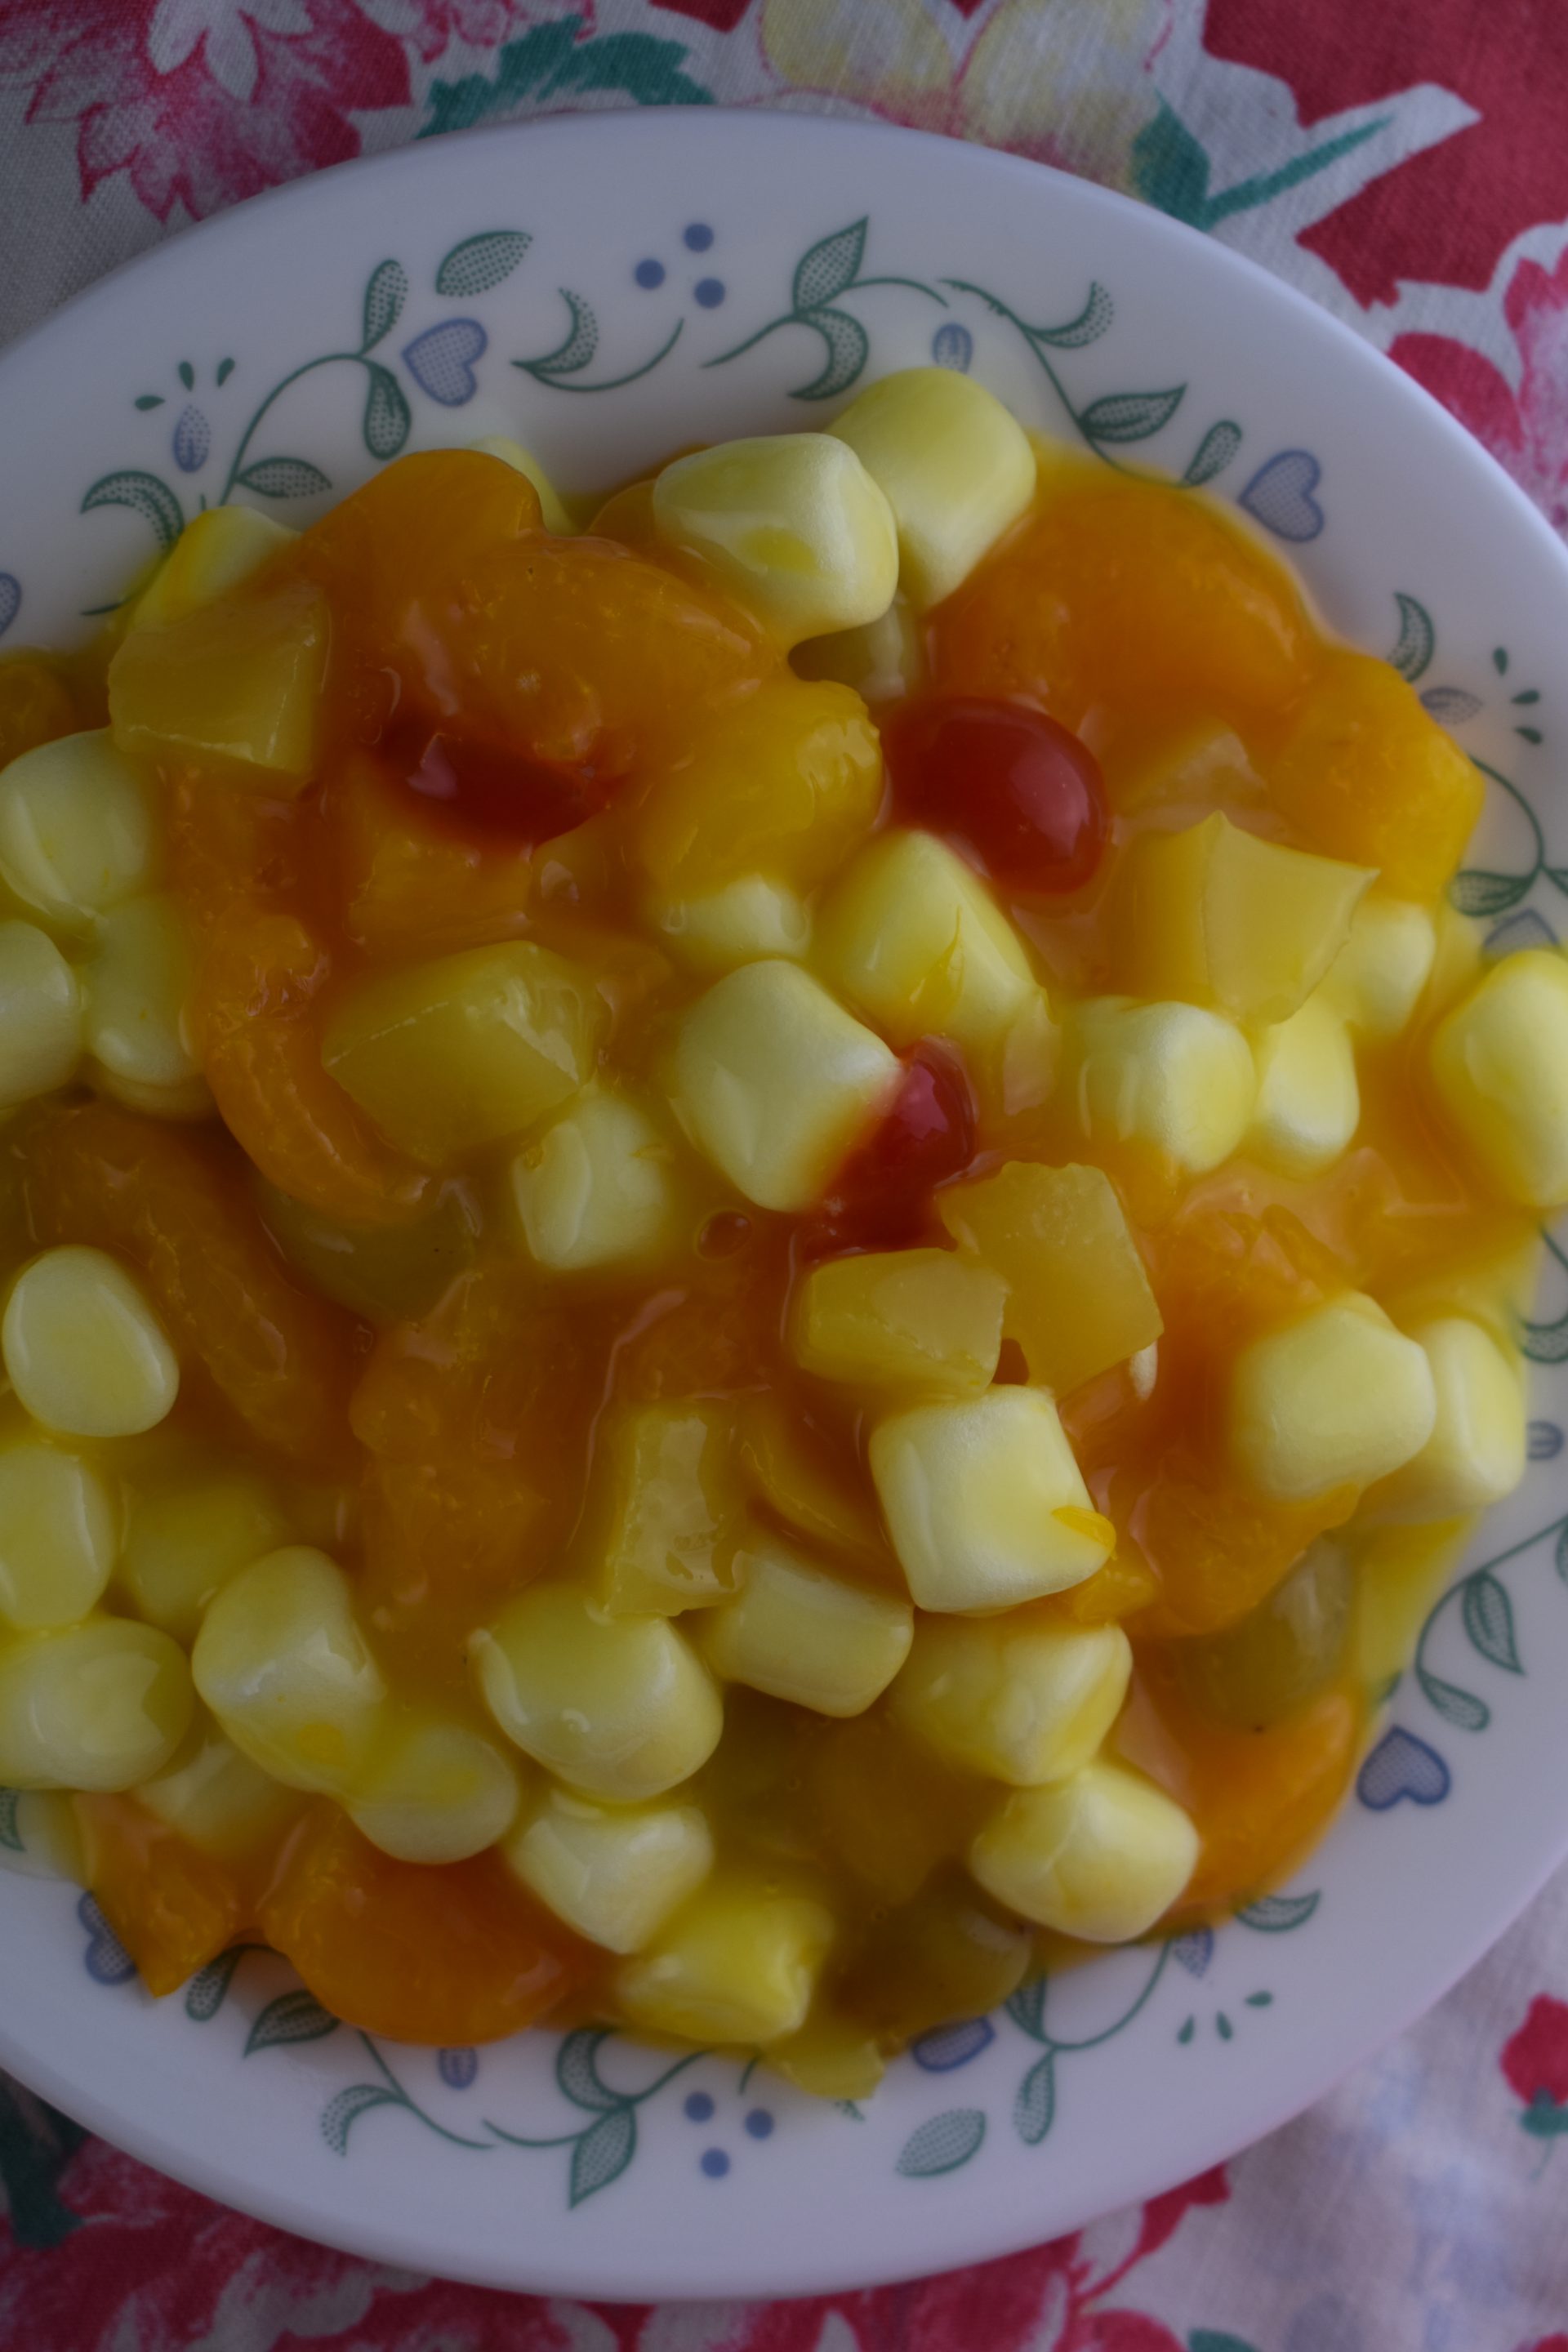 Old-Fashioned Fruit Salad – A Fruit Salad Recipe with Pudding